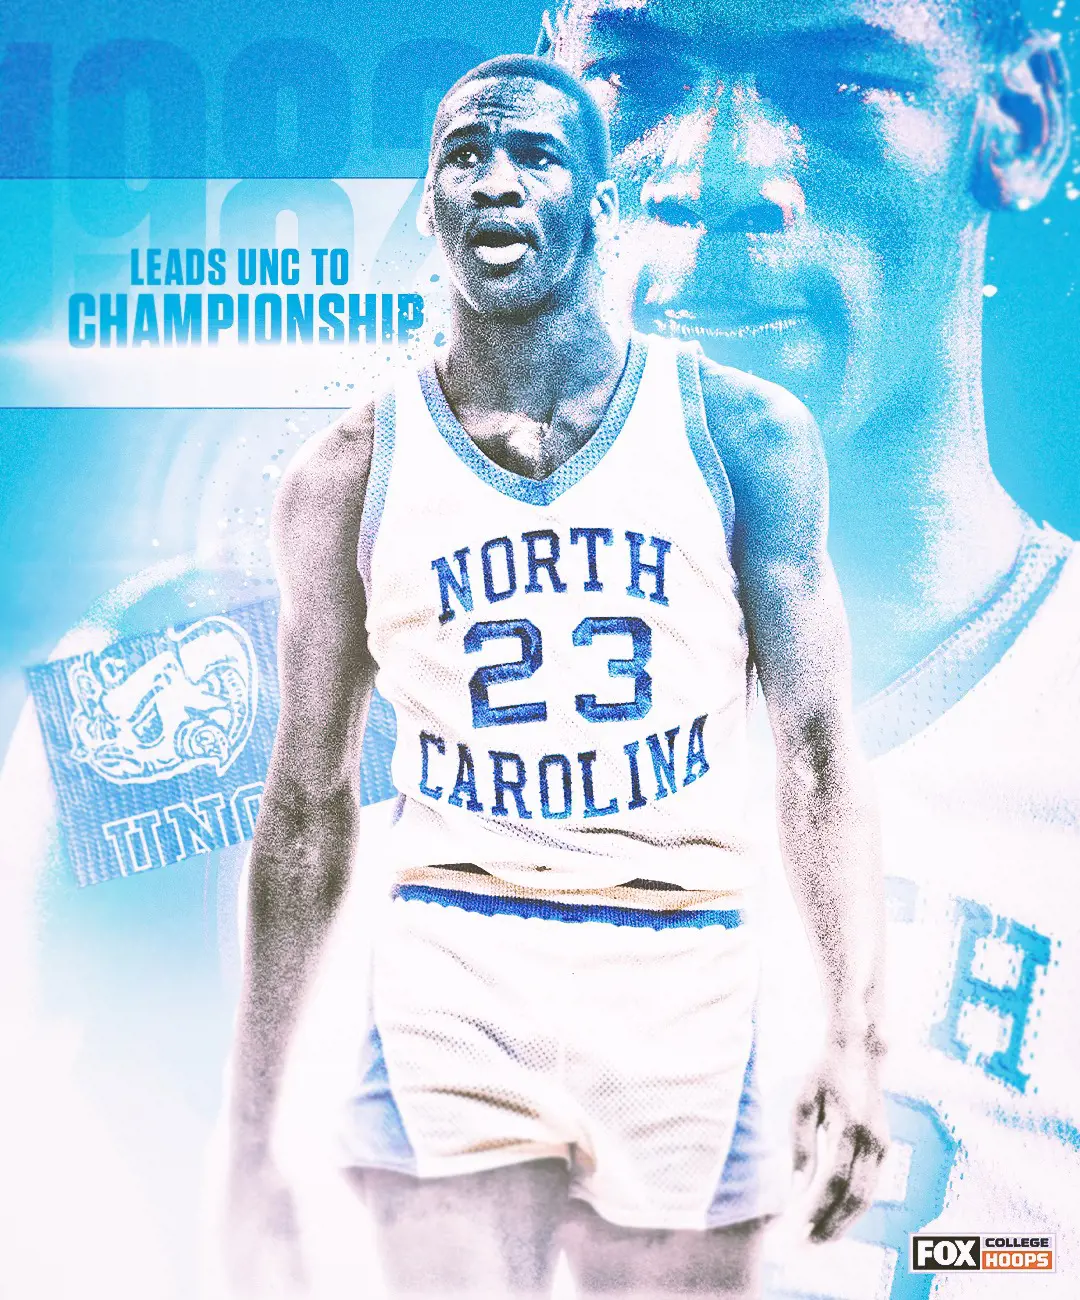 Michael Jordan won NCAA championship for all three years during his time with the North Carolina (UNC) university